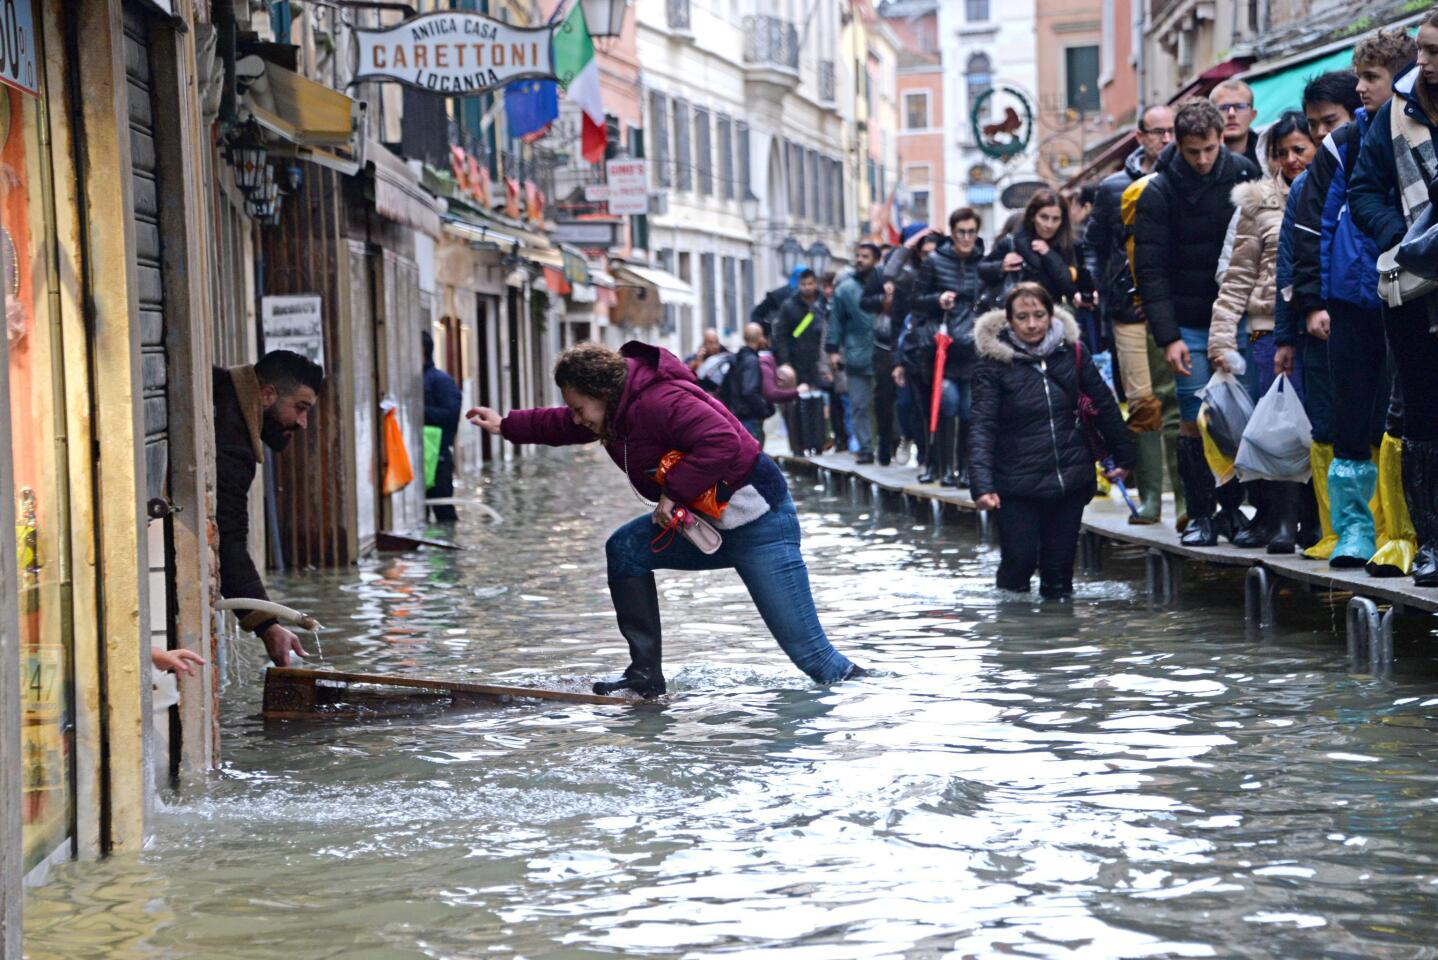 A woman tries to cross a flooded street as people walk on a trestle bridge during high water in Venice.